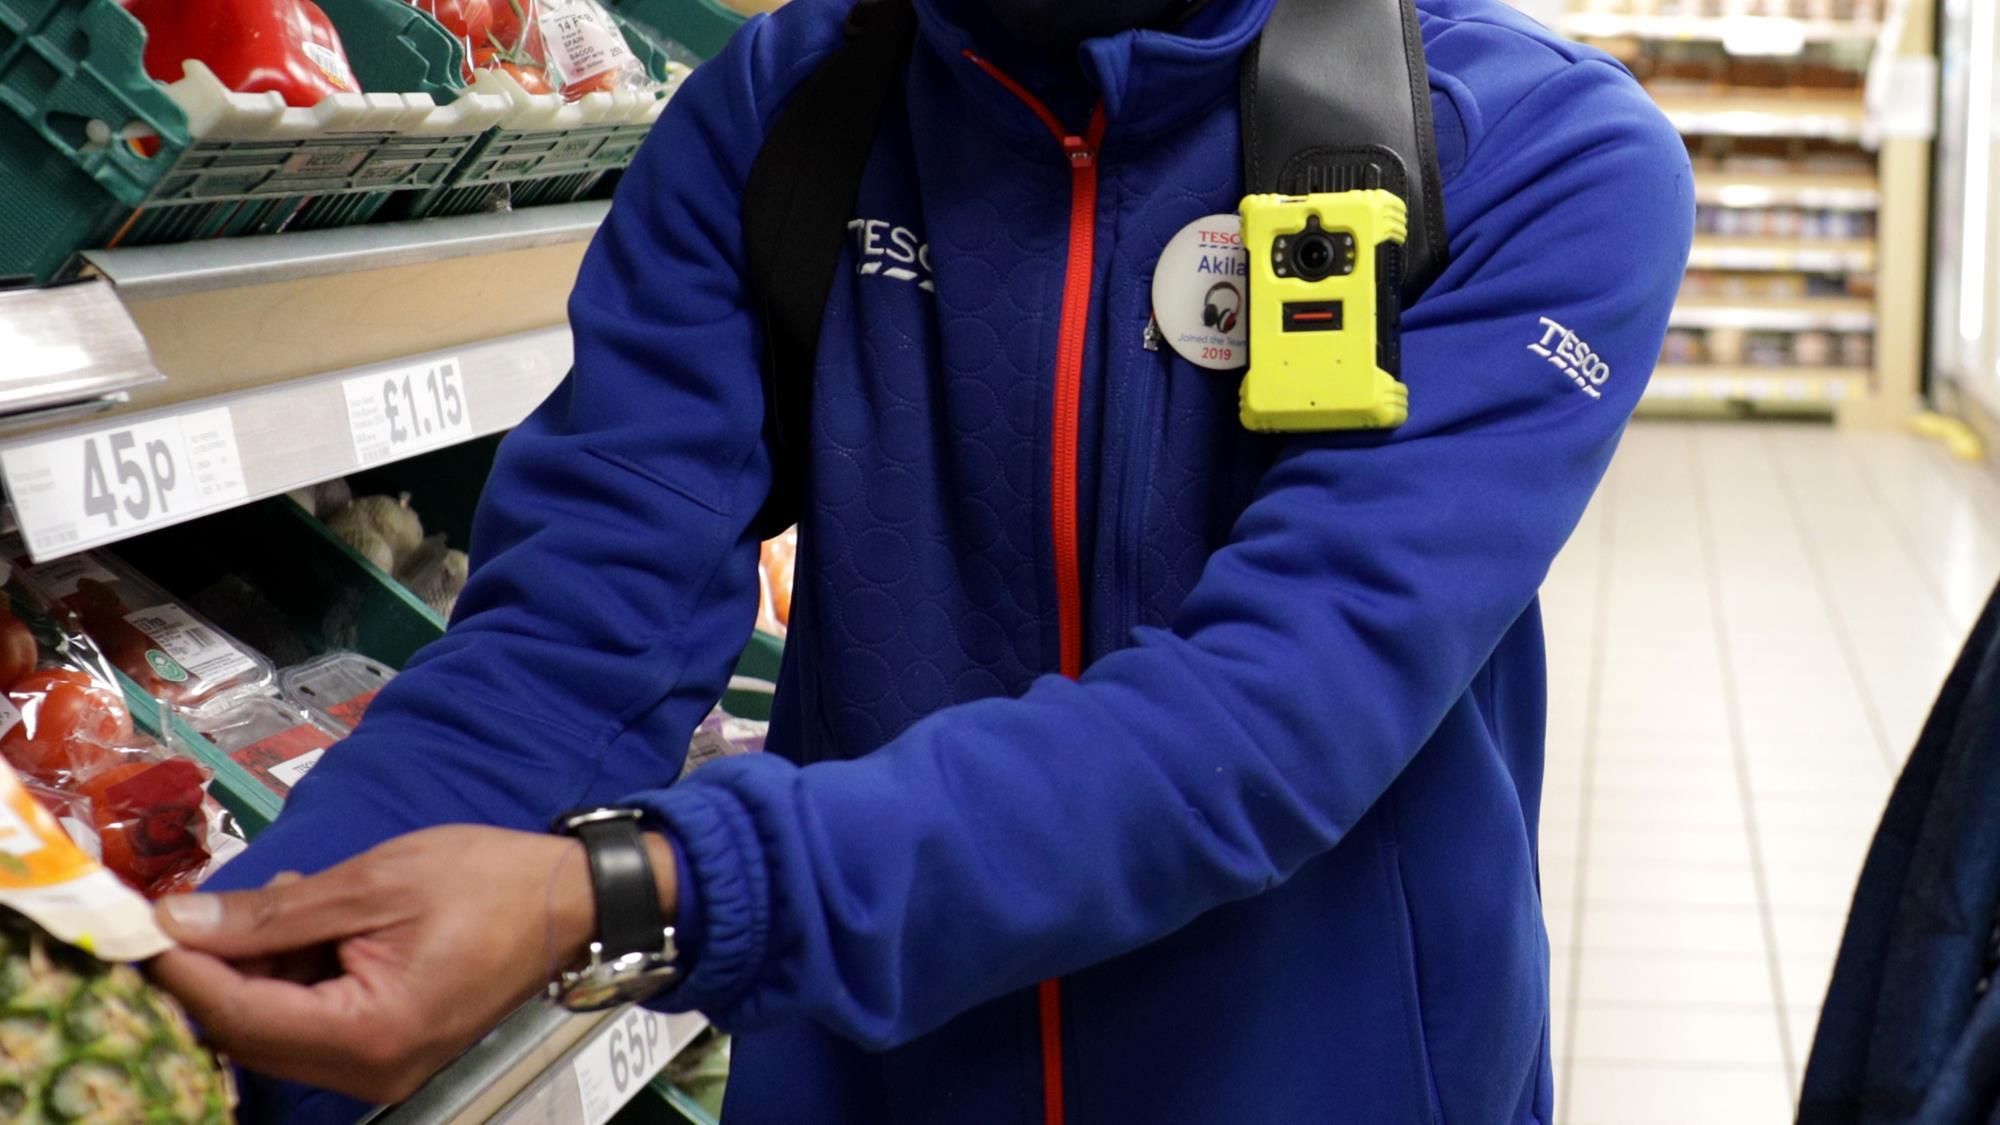 TJ Maxx and Marshalls Fight Back New Body Cameras Aim to Stop Store Thefts--